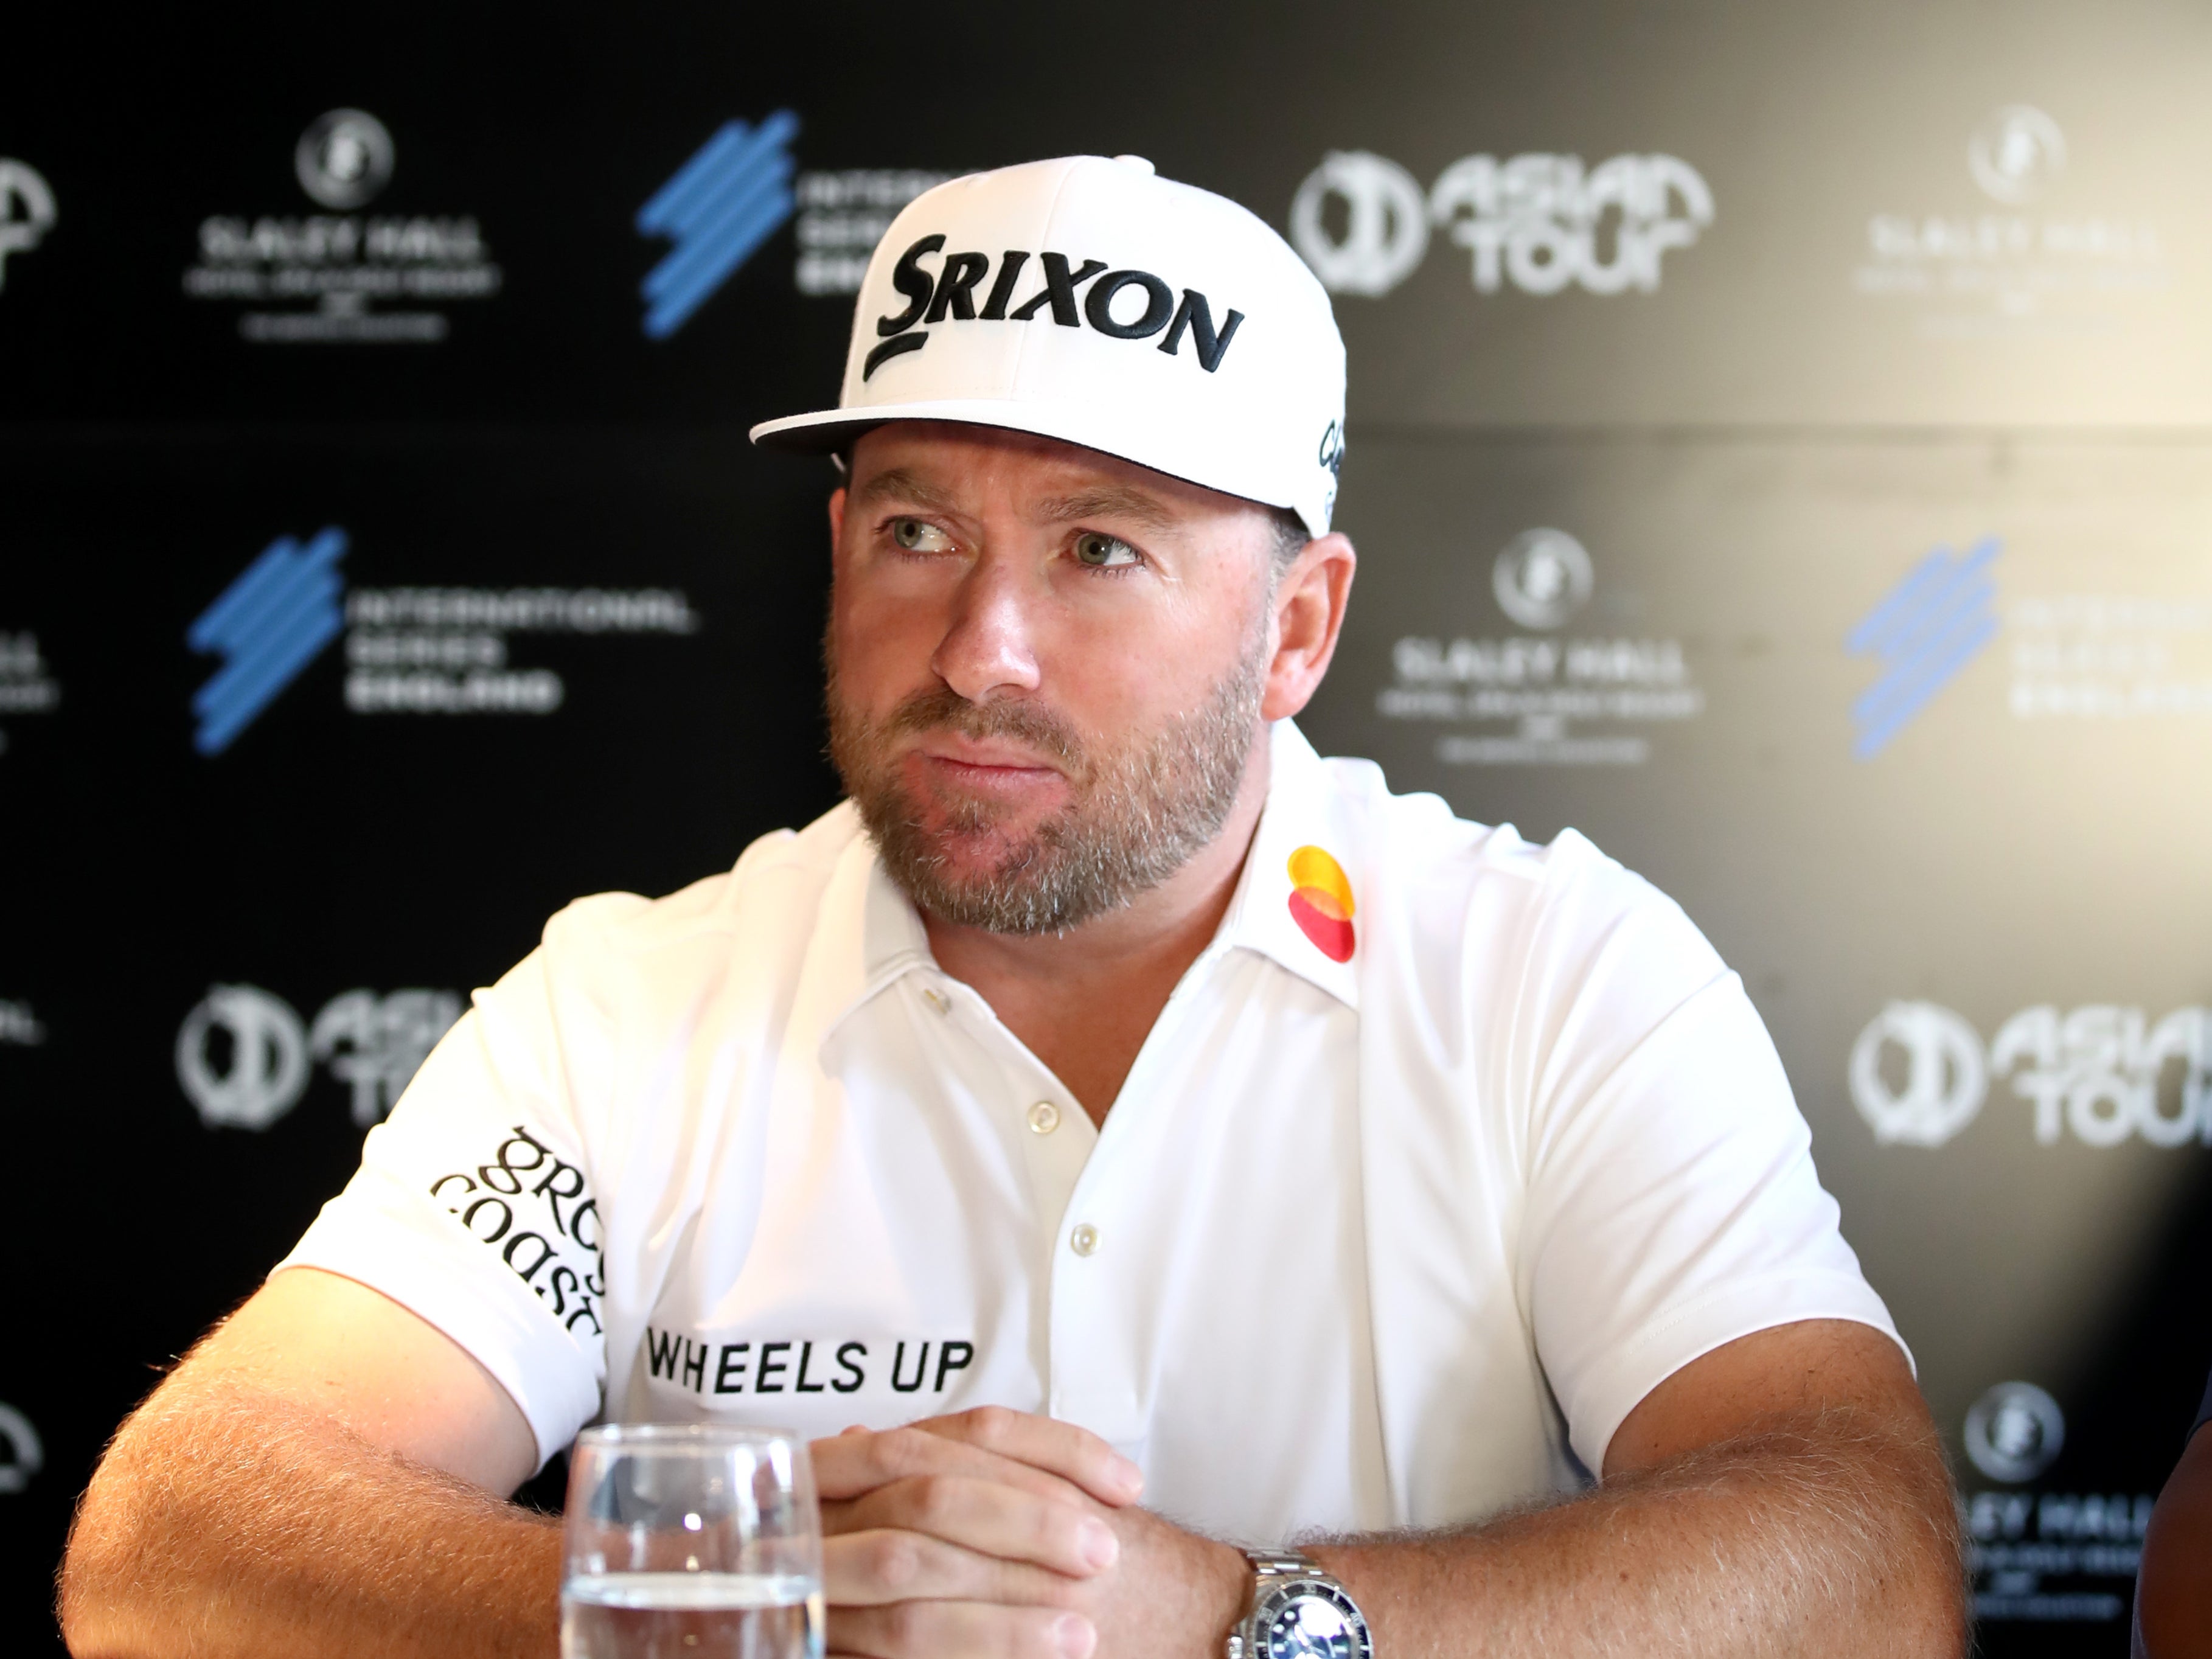 McDowell has defended his decision to play in the opening event of the LIV Golf International Series